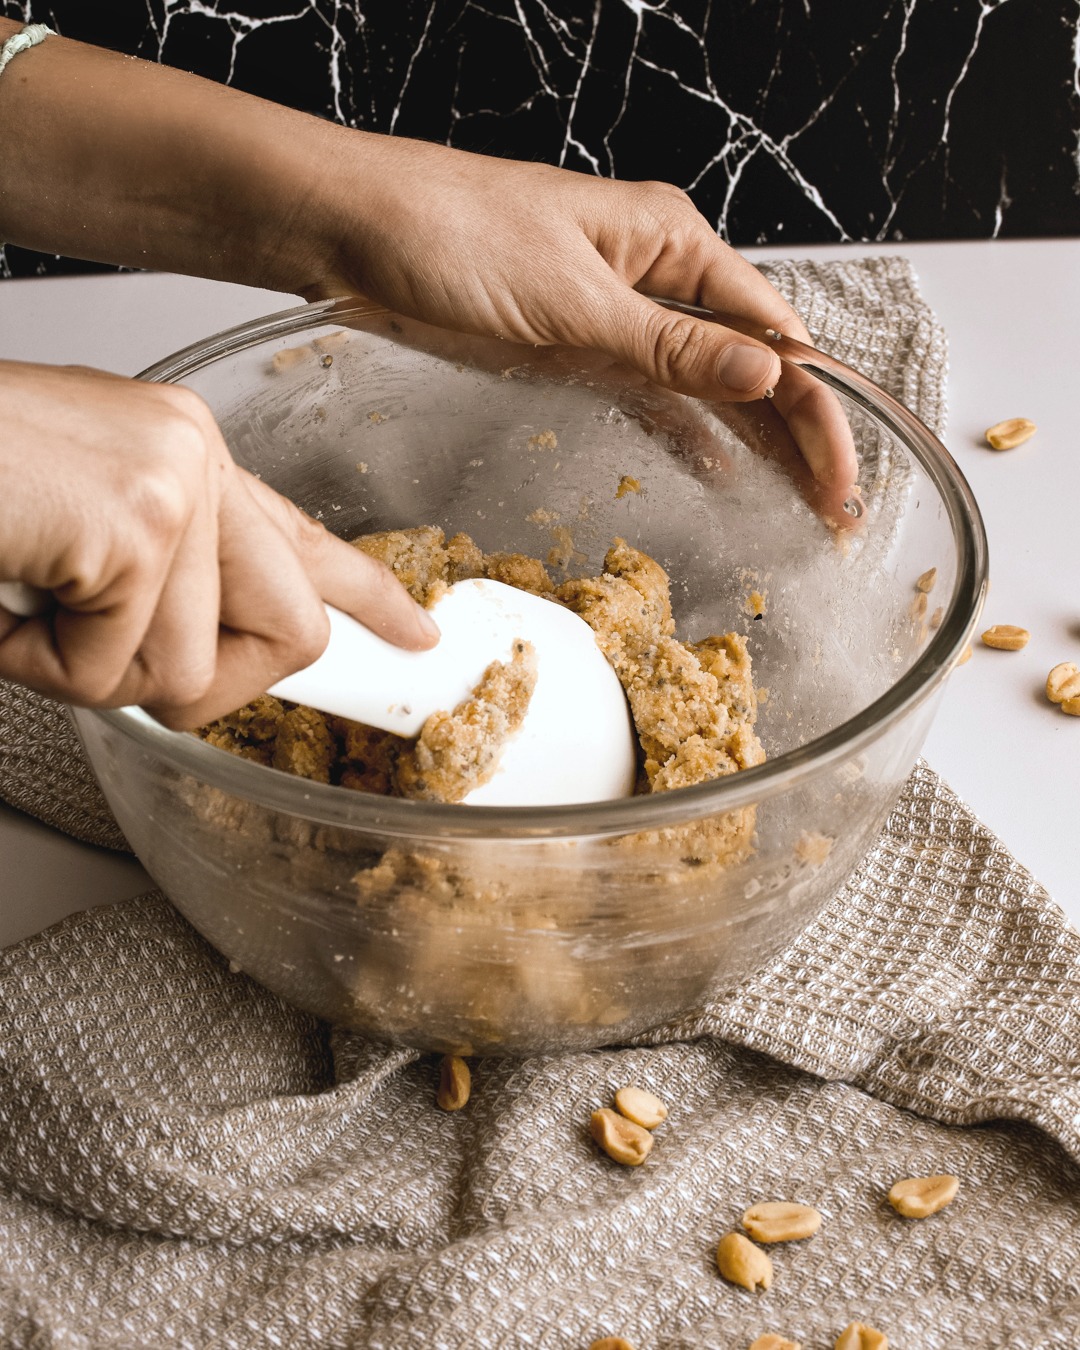 A hand stirs and mixes ingredients together in a medium mixing bowl. It sits on top of a brown napkin and peanuts surround it.